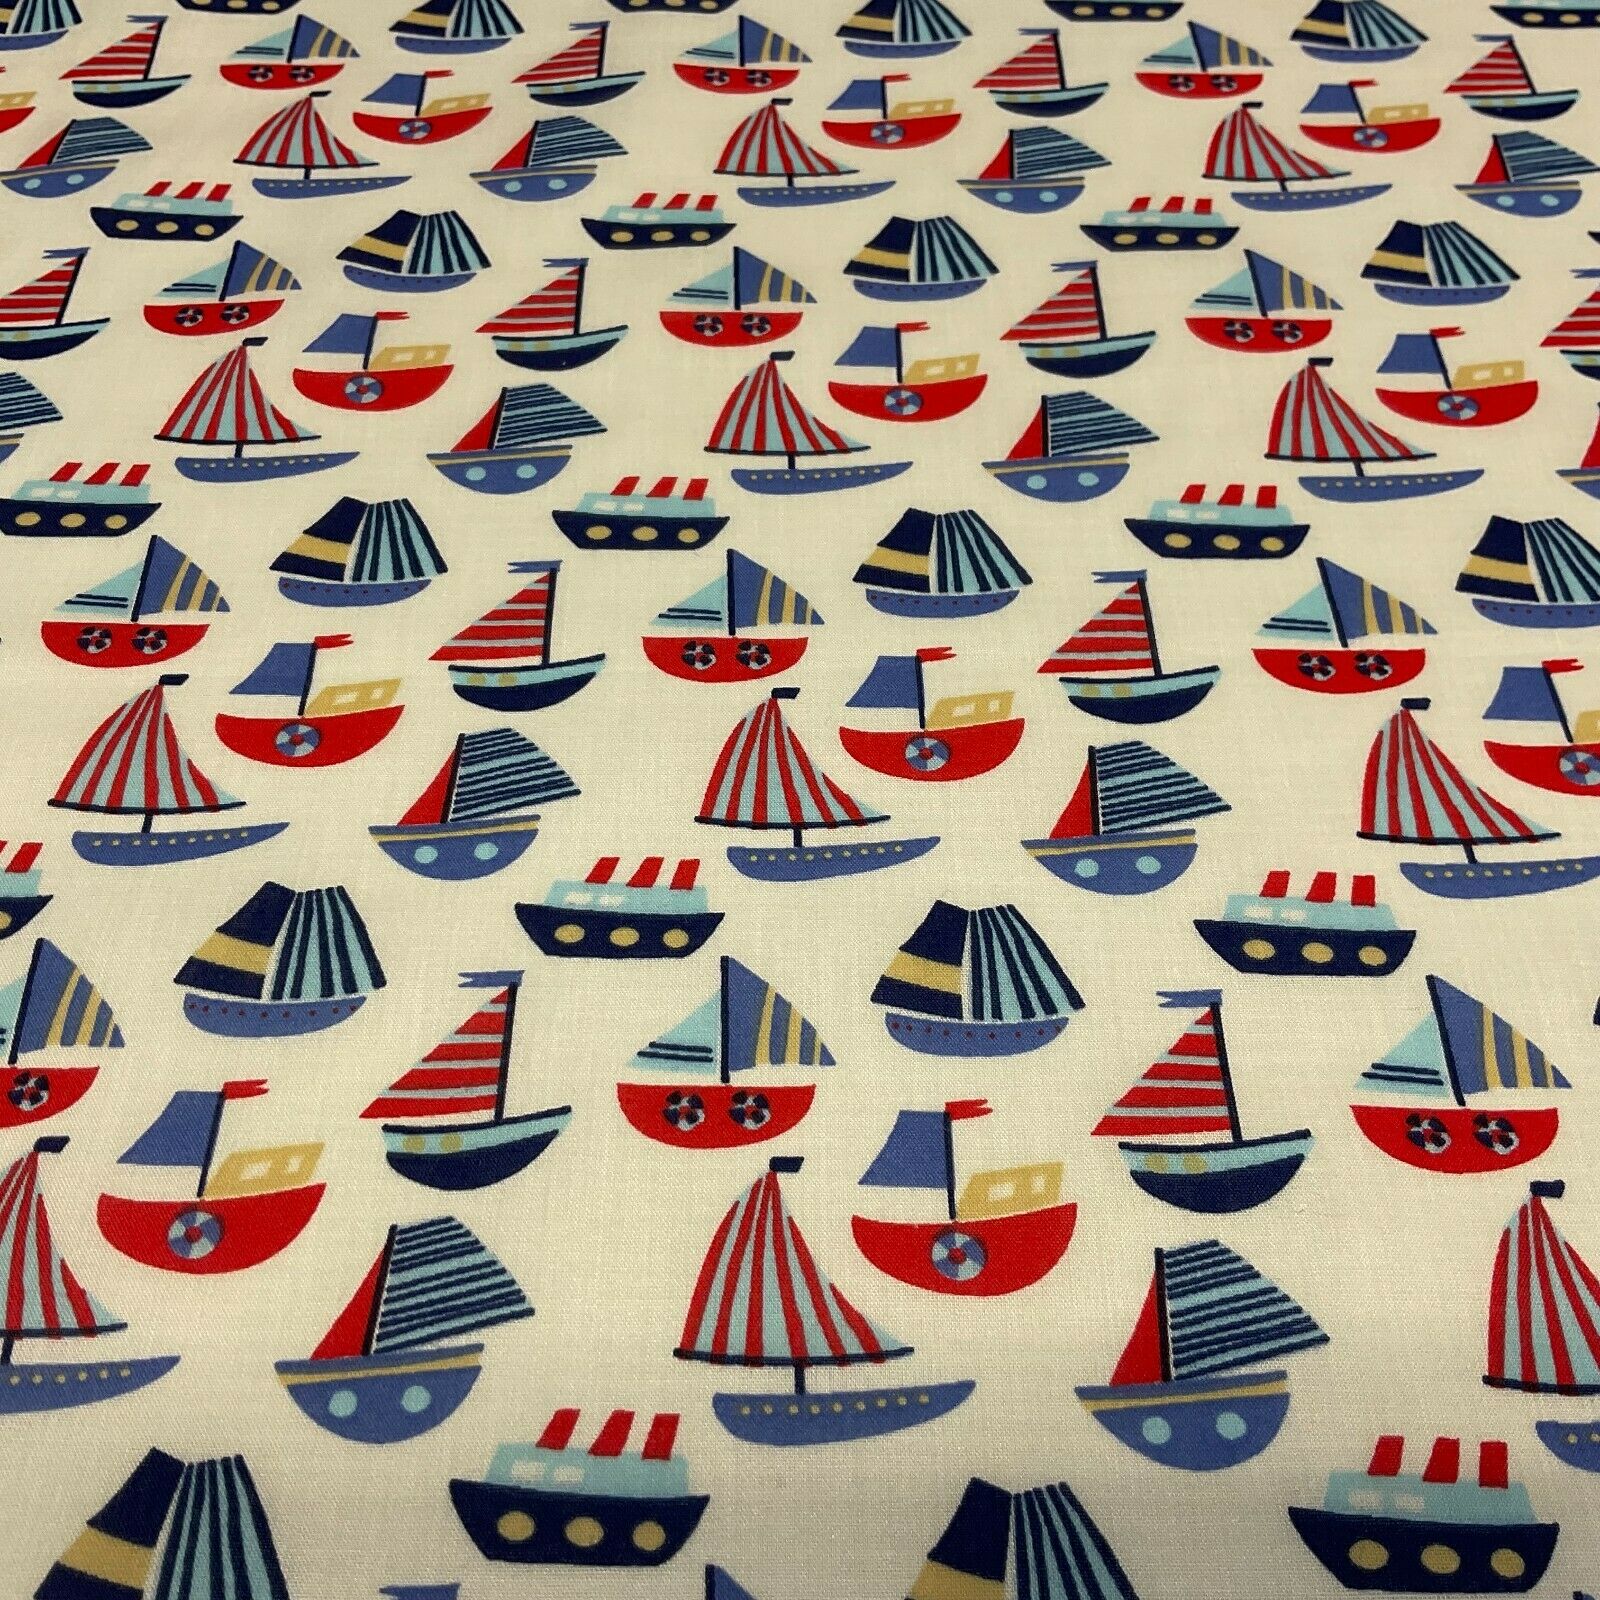 Boats sea Novelty Children Poly cotton printed lightweight fabric M1627